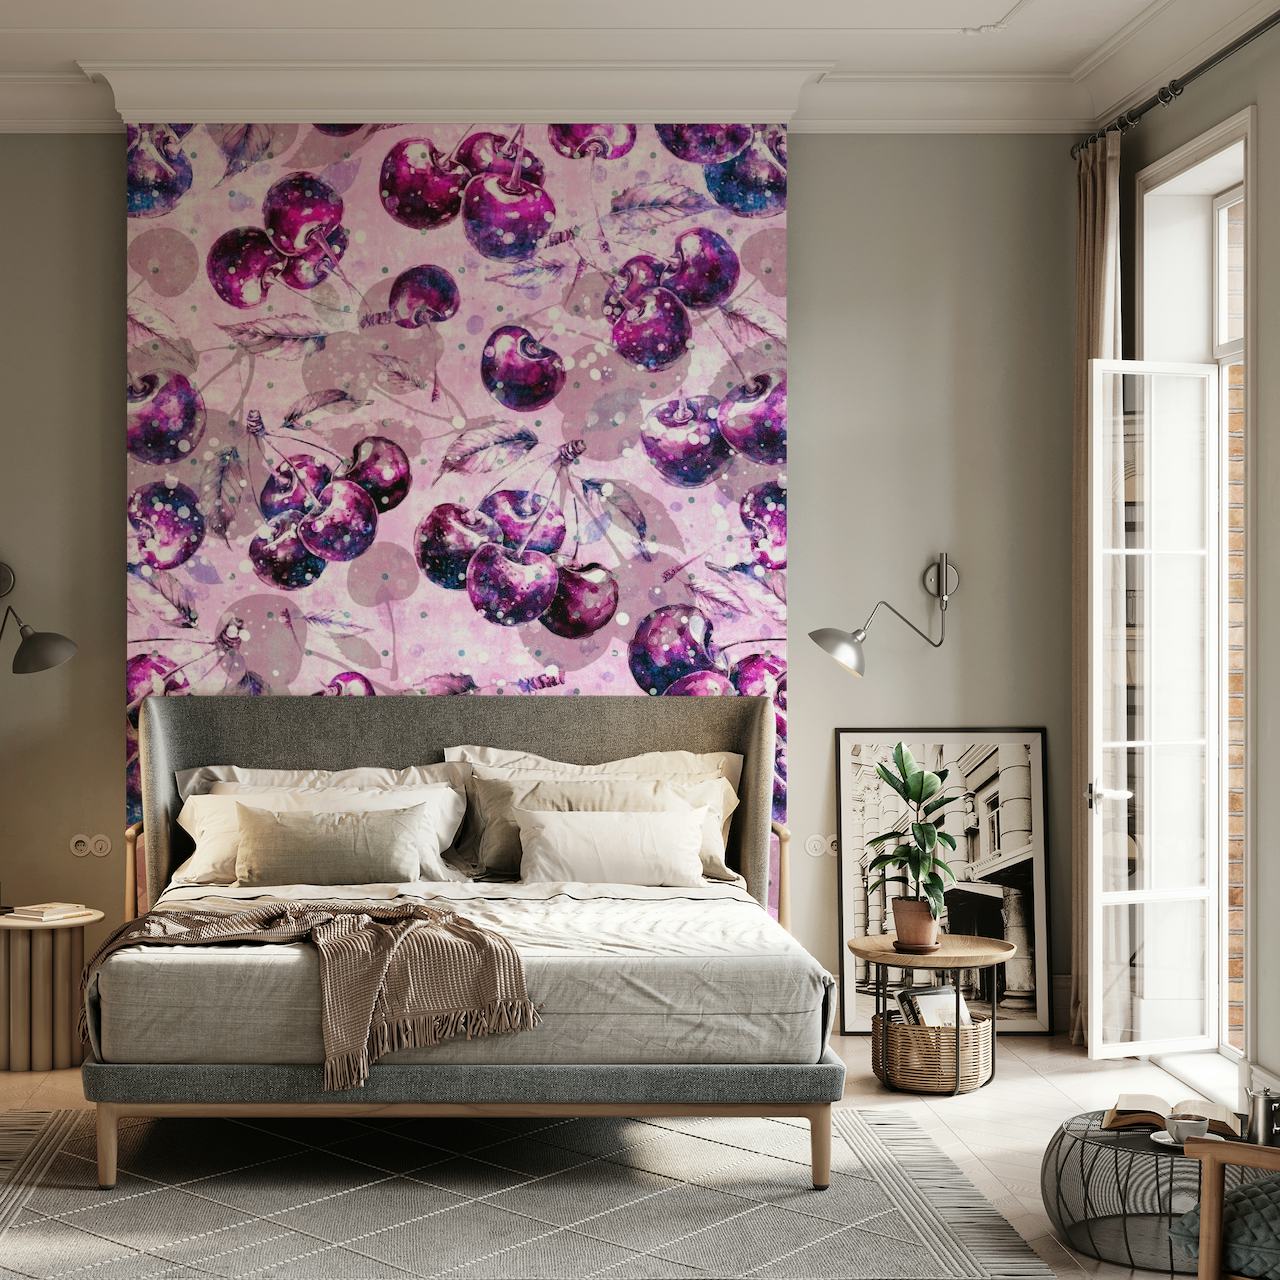 Fantasy-style cherries with glitter on a soft pink wall mural